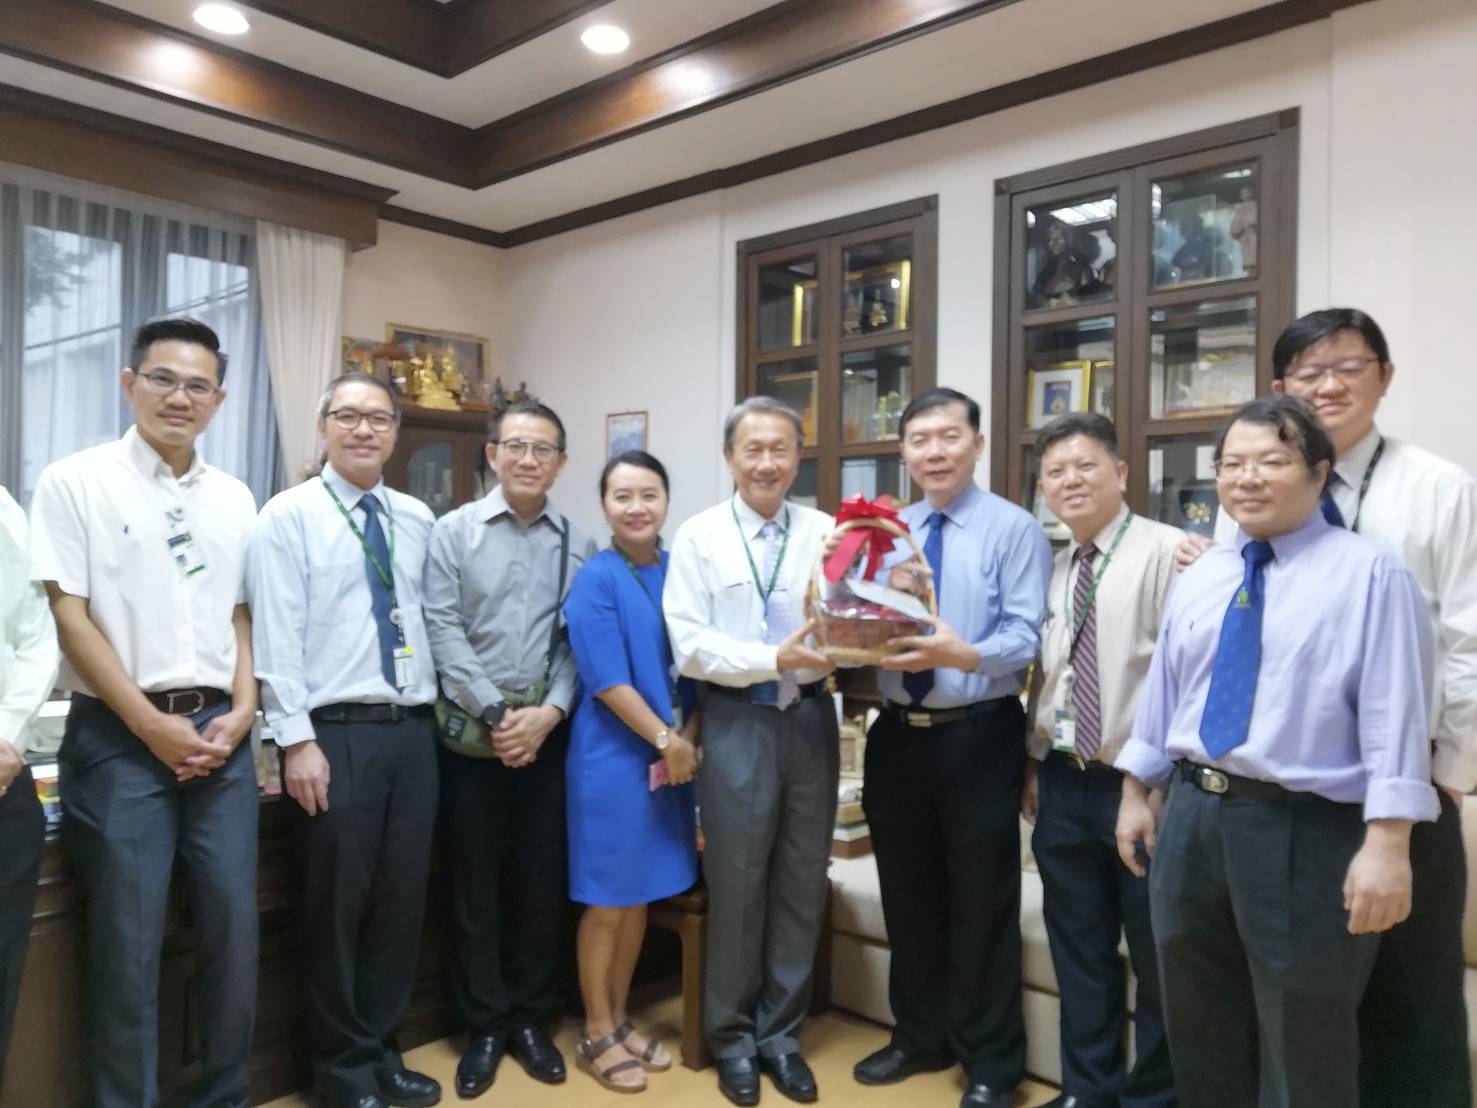 Department of Surgery visits Dean for the celebration New Year 2019